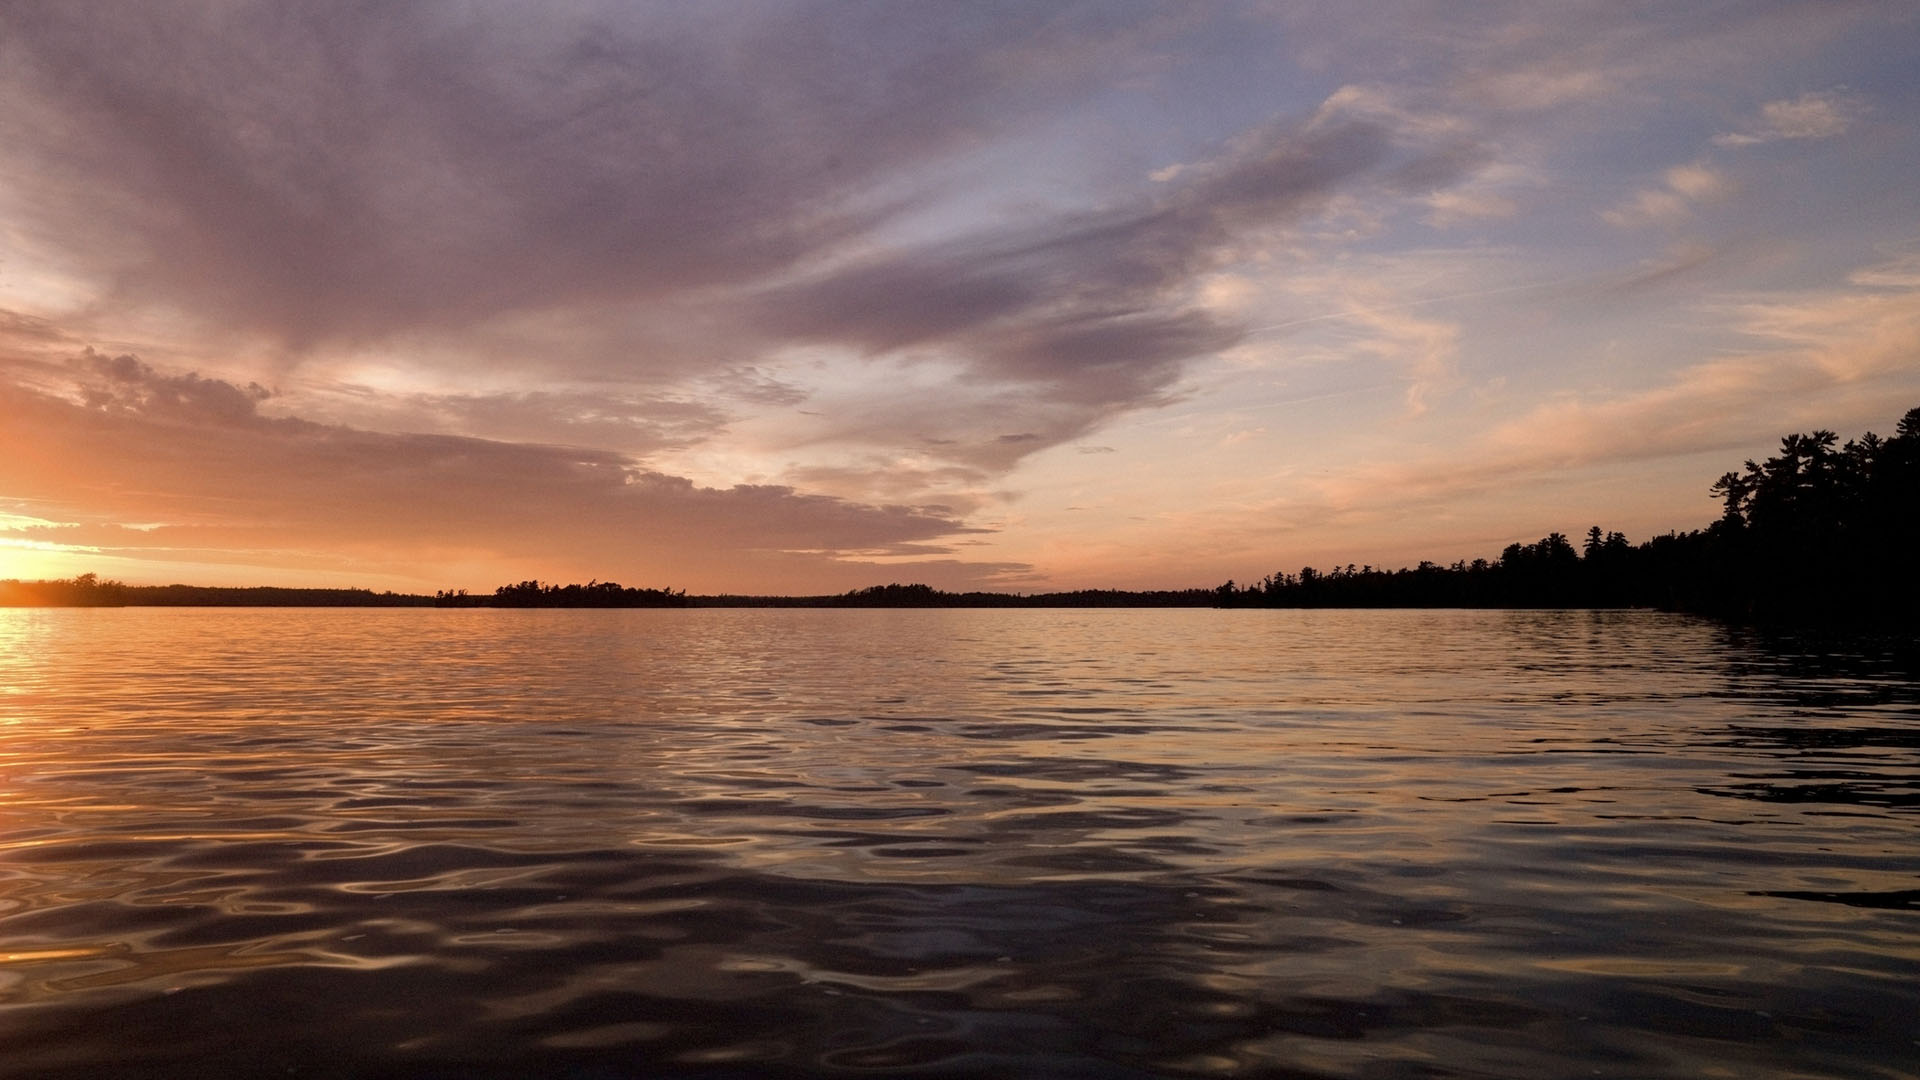 Lake of the Woods, Ontario, Canada; Twilight over still lake water